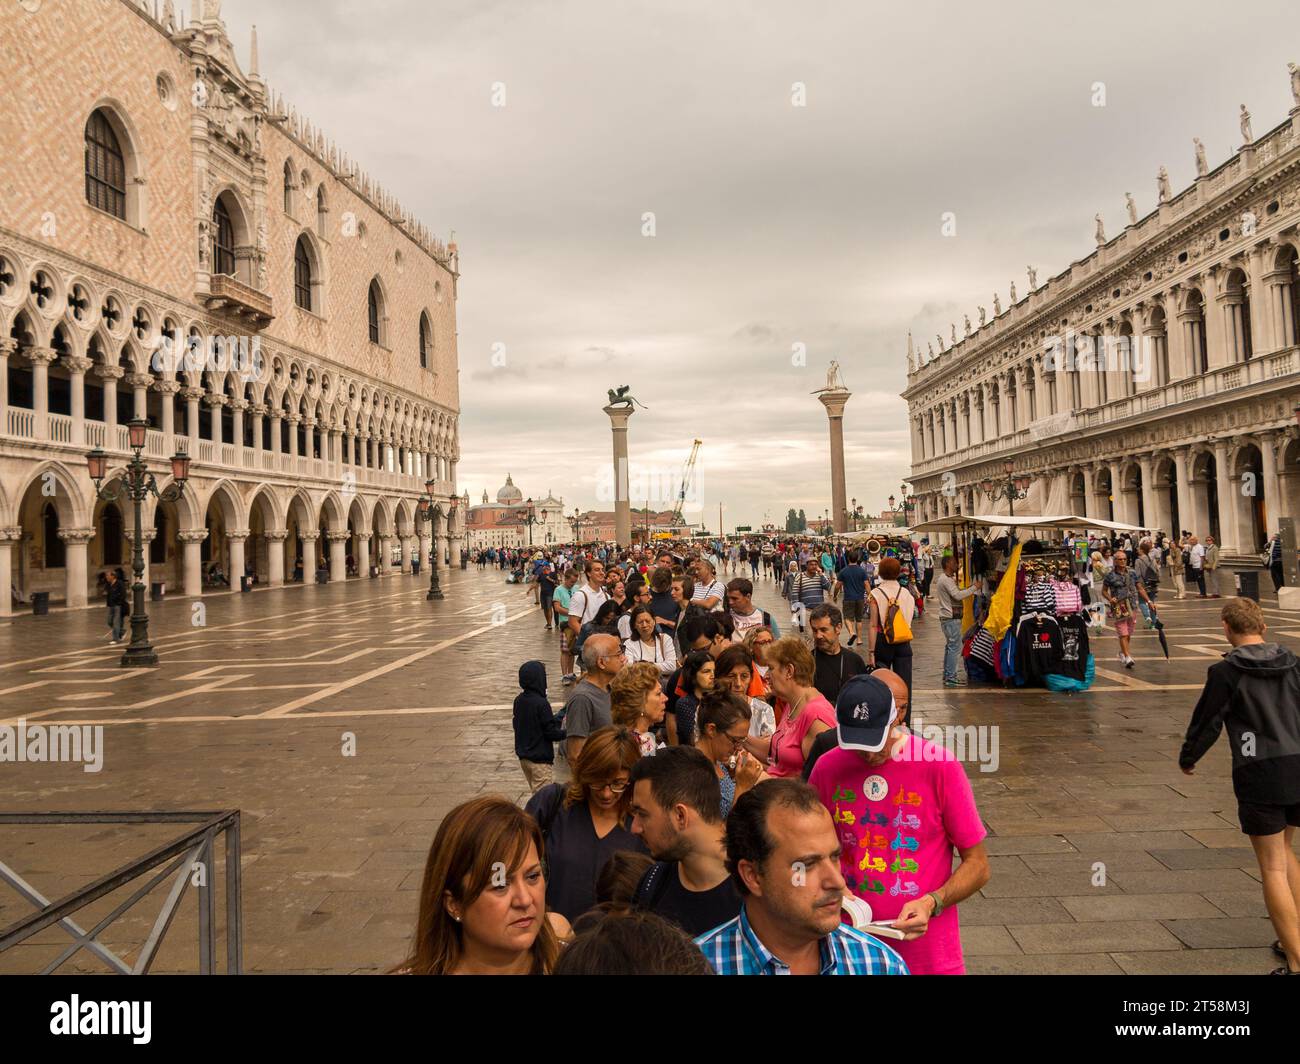 Large crowd waiting to enter St. Mark's Basilica in Venice, Italy. Stock Photo